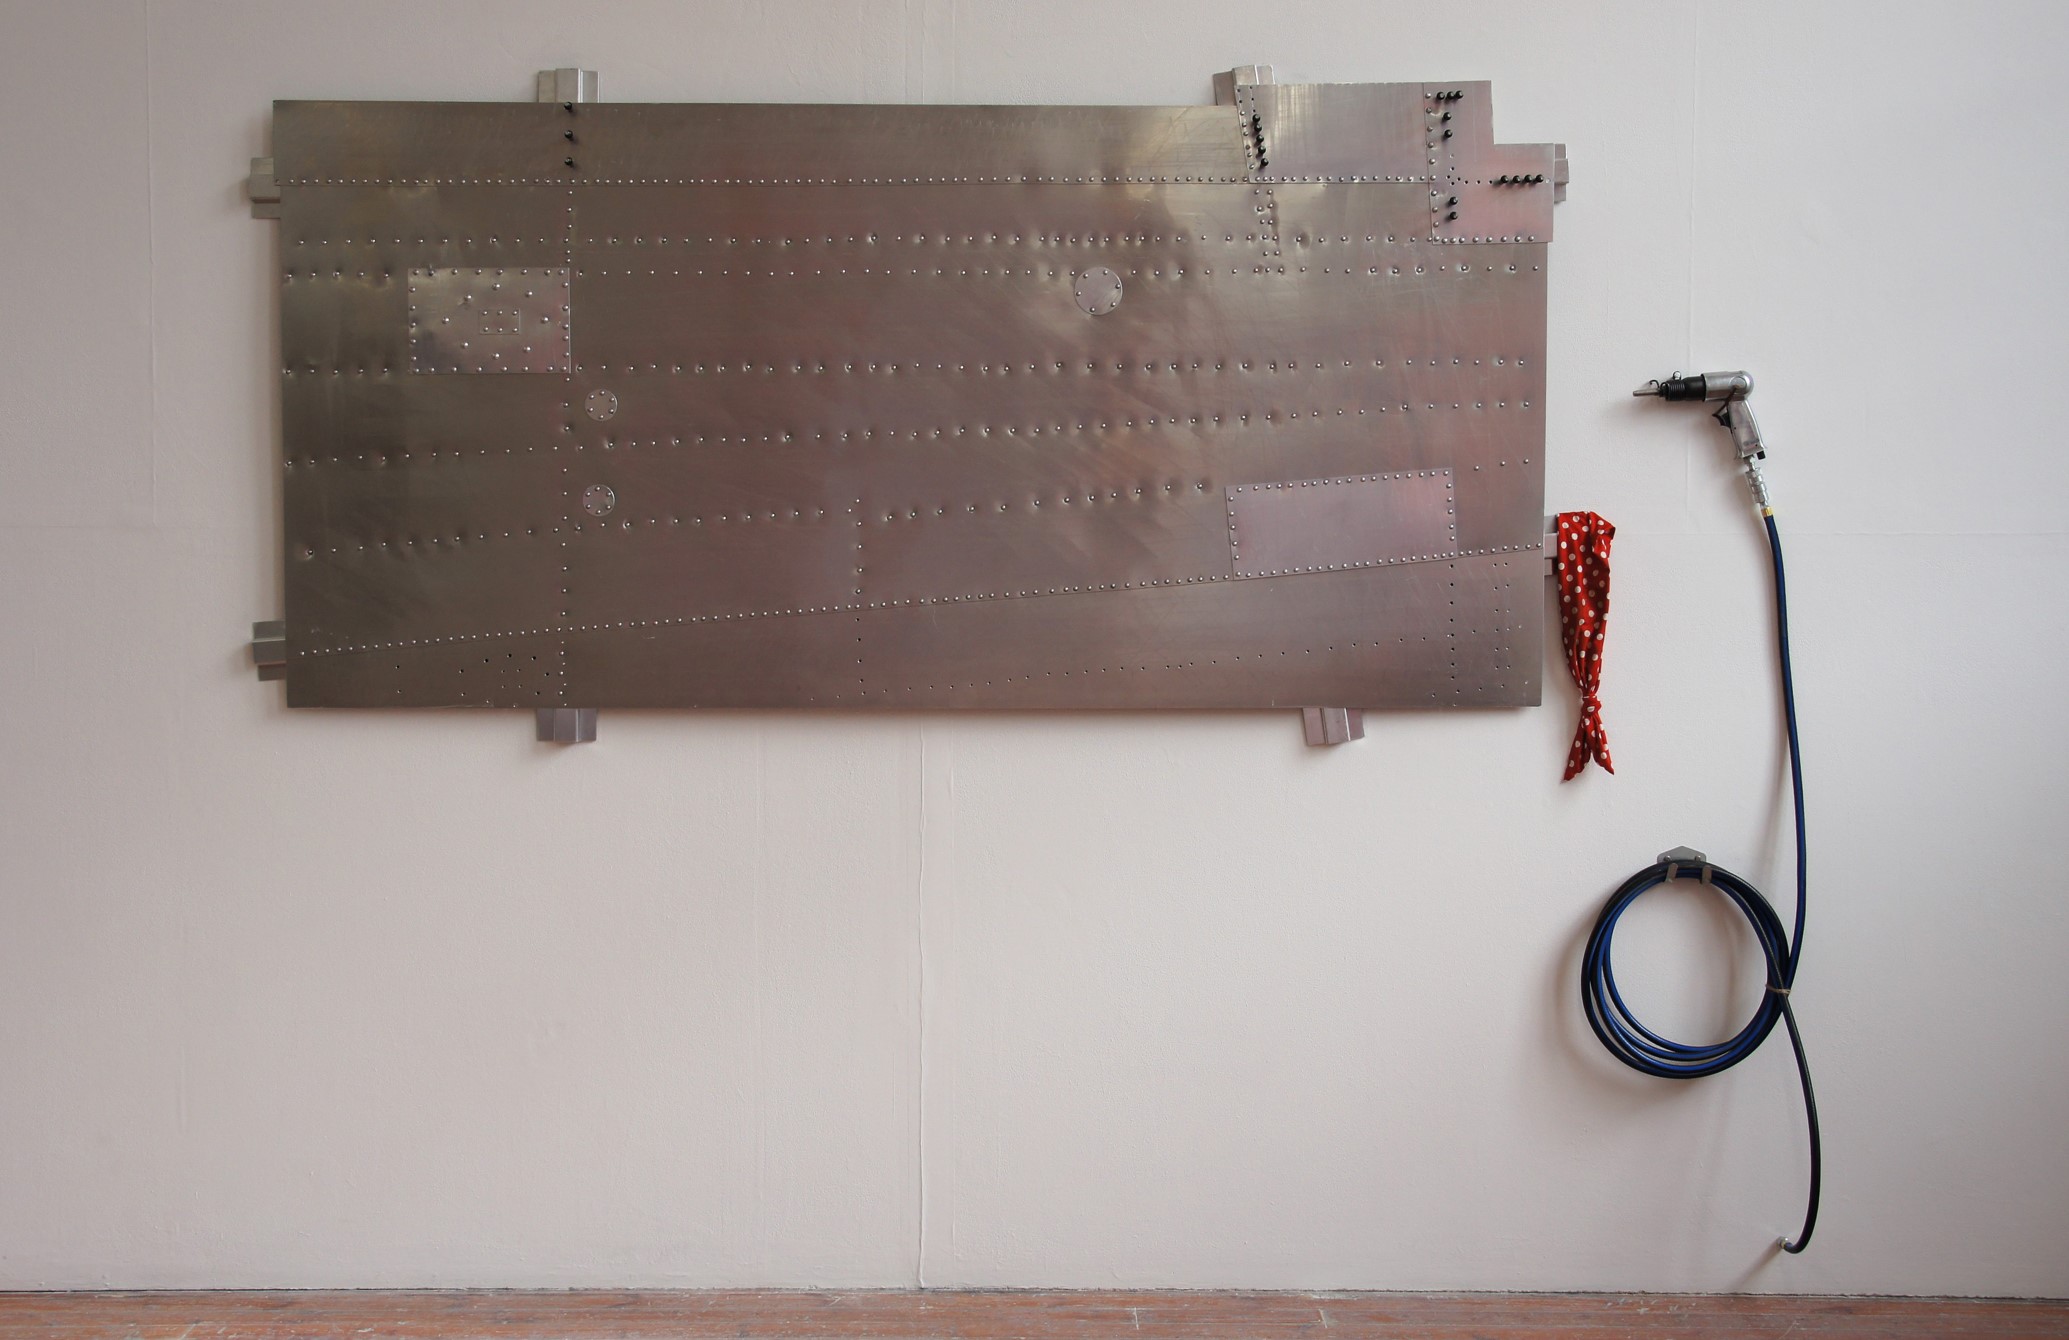 A metal sculpture by Marek Jeczalik. A large section of Aircraft hangs on the wall with tools.